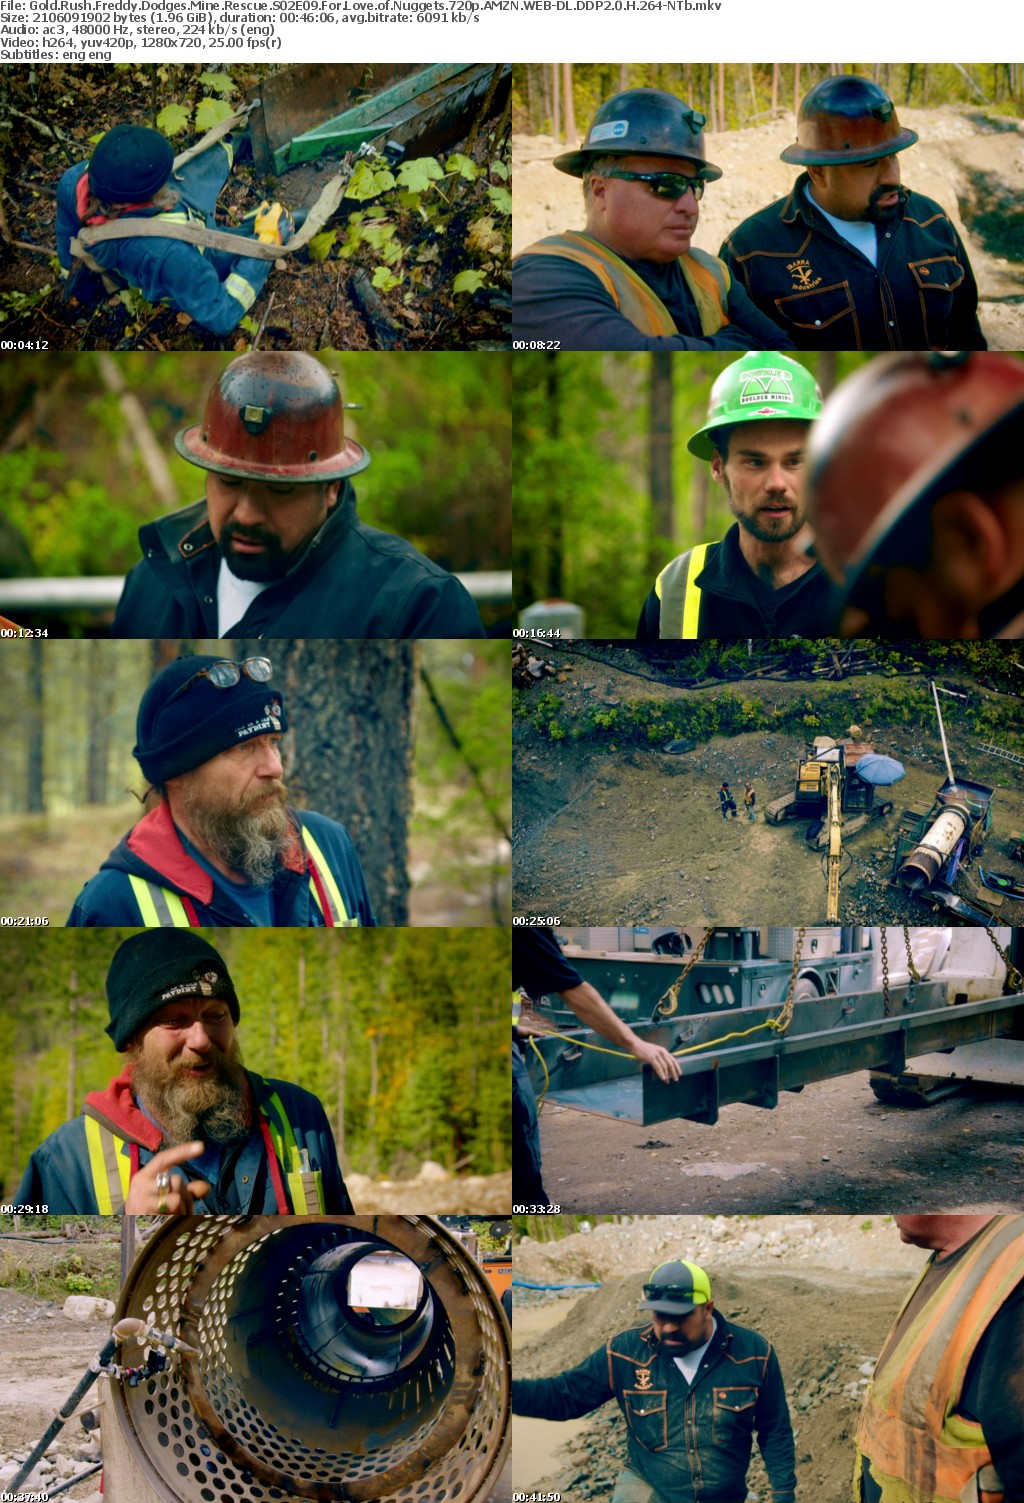 Gold Rush Freddy Dodges Mine Rescue S02E09 For Love of Nuggets 720p AMZN WEBRip DDP2 0 x264-NTb